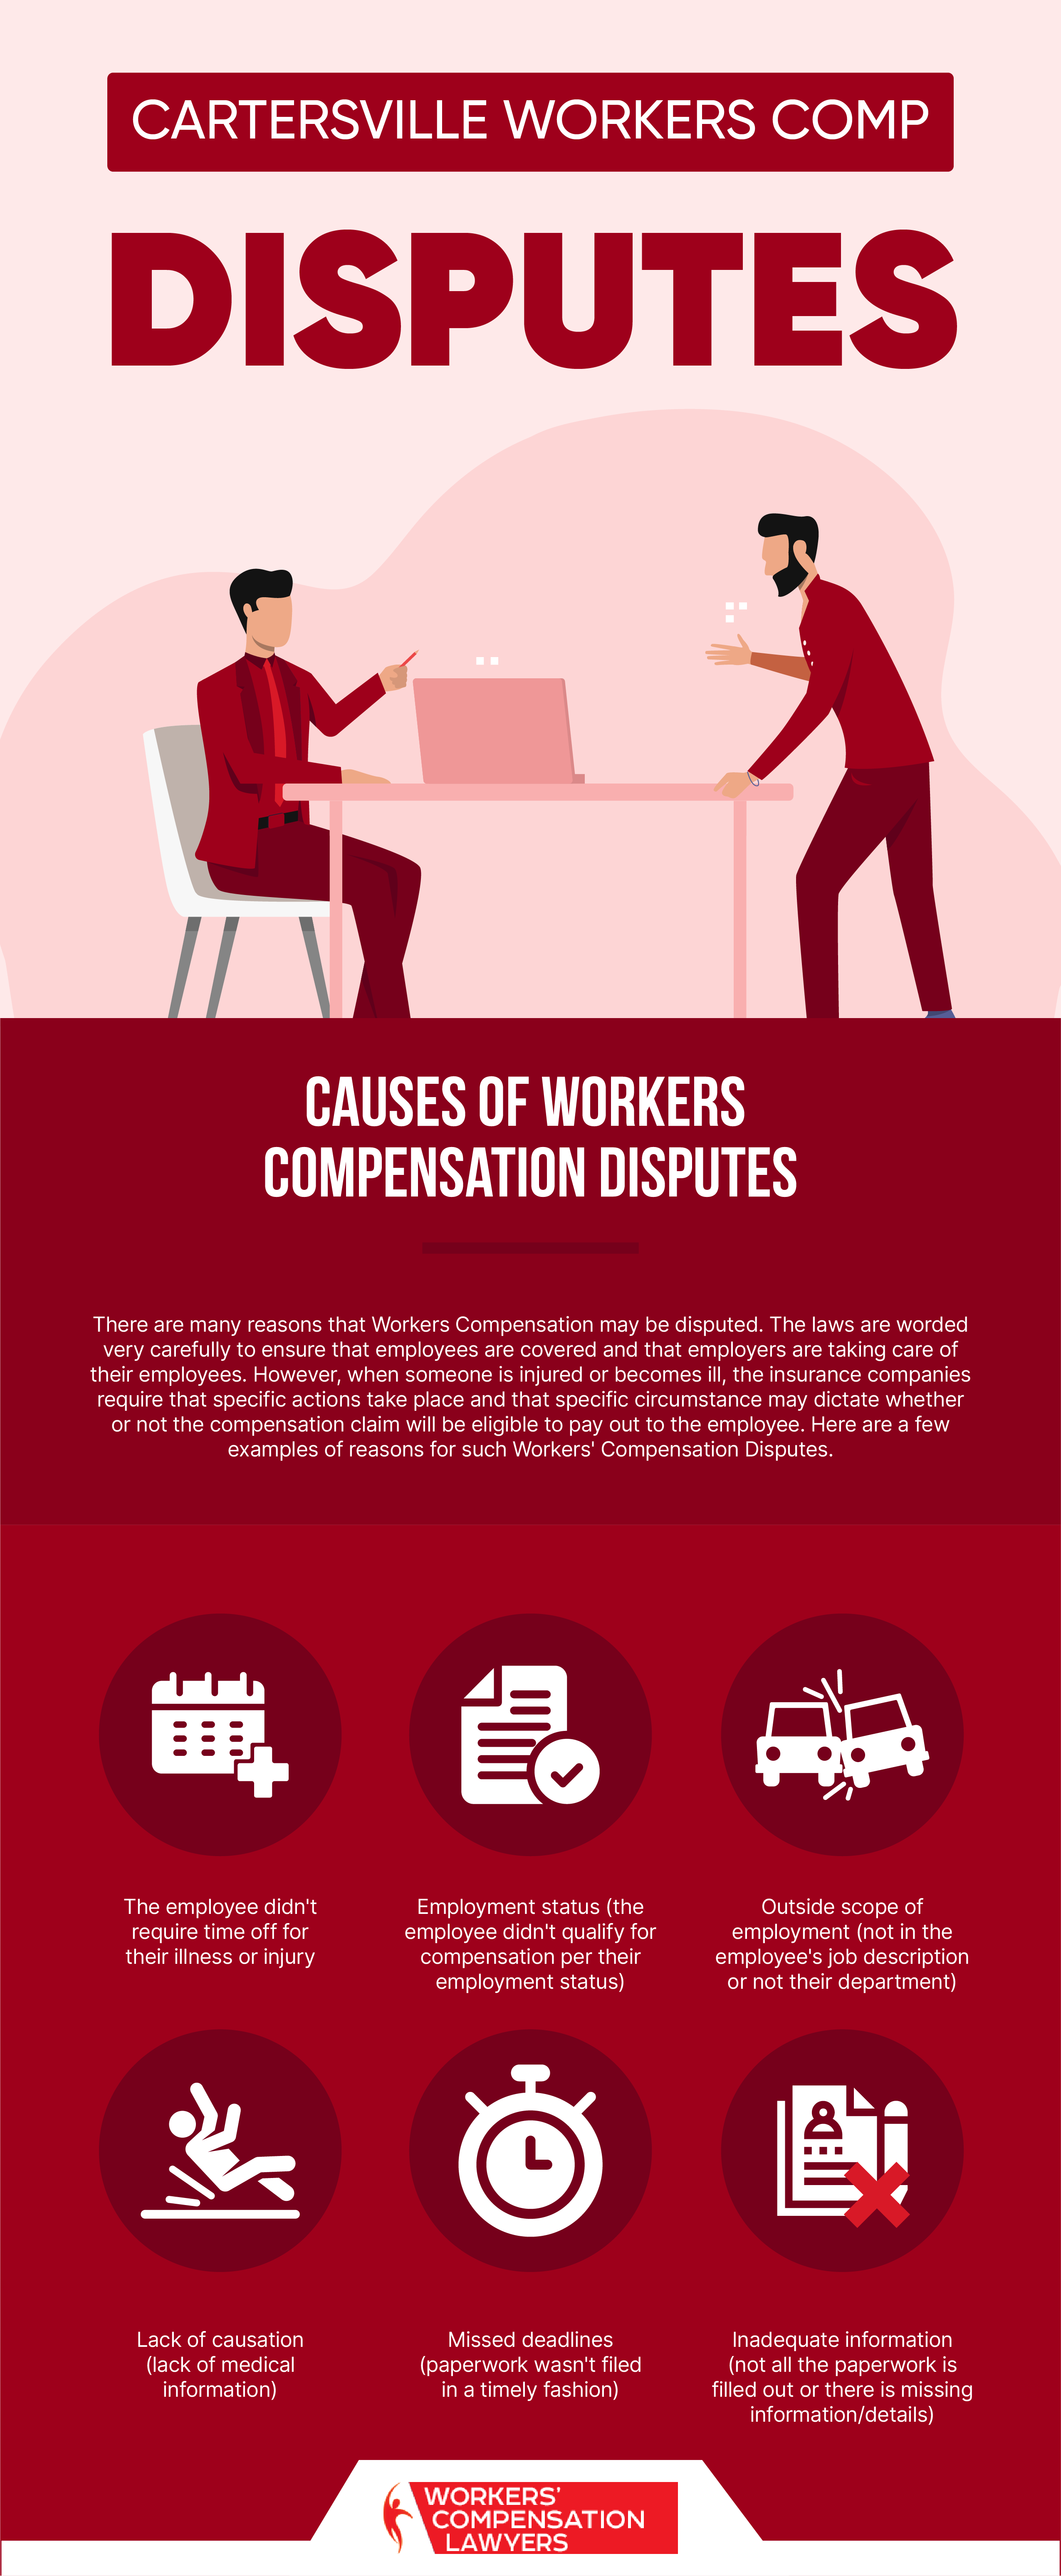 Cartersville Workers Compensation Disputes Infographic